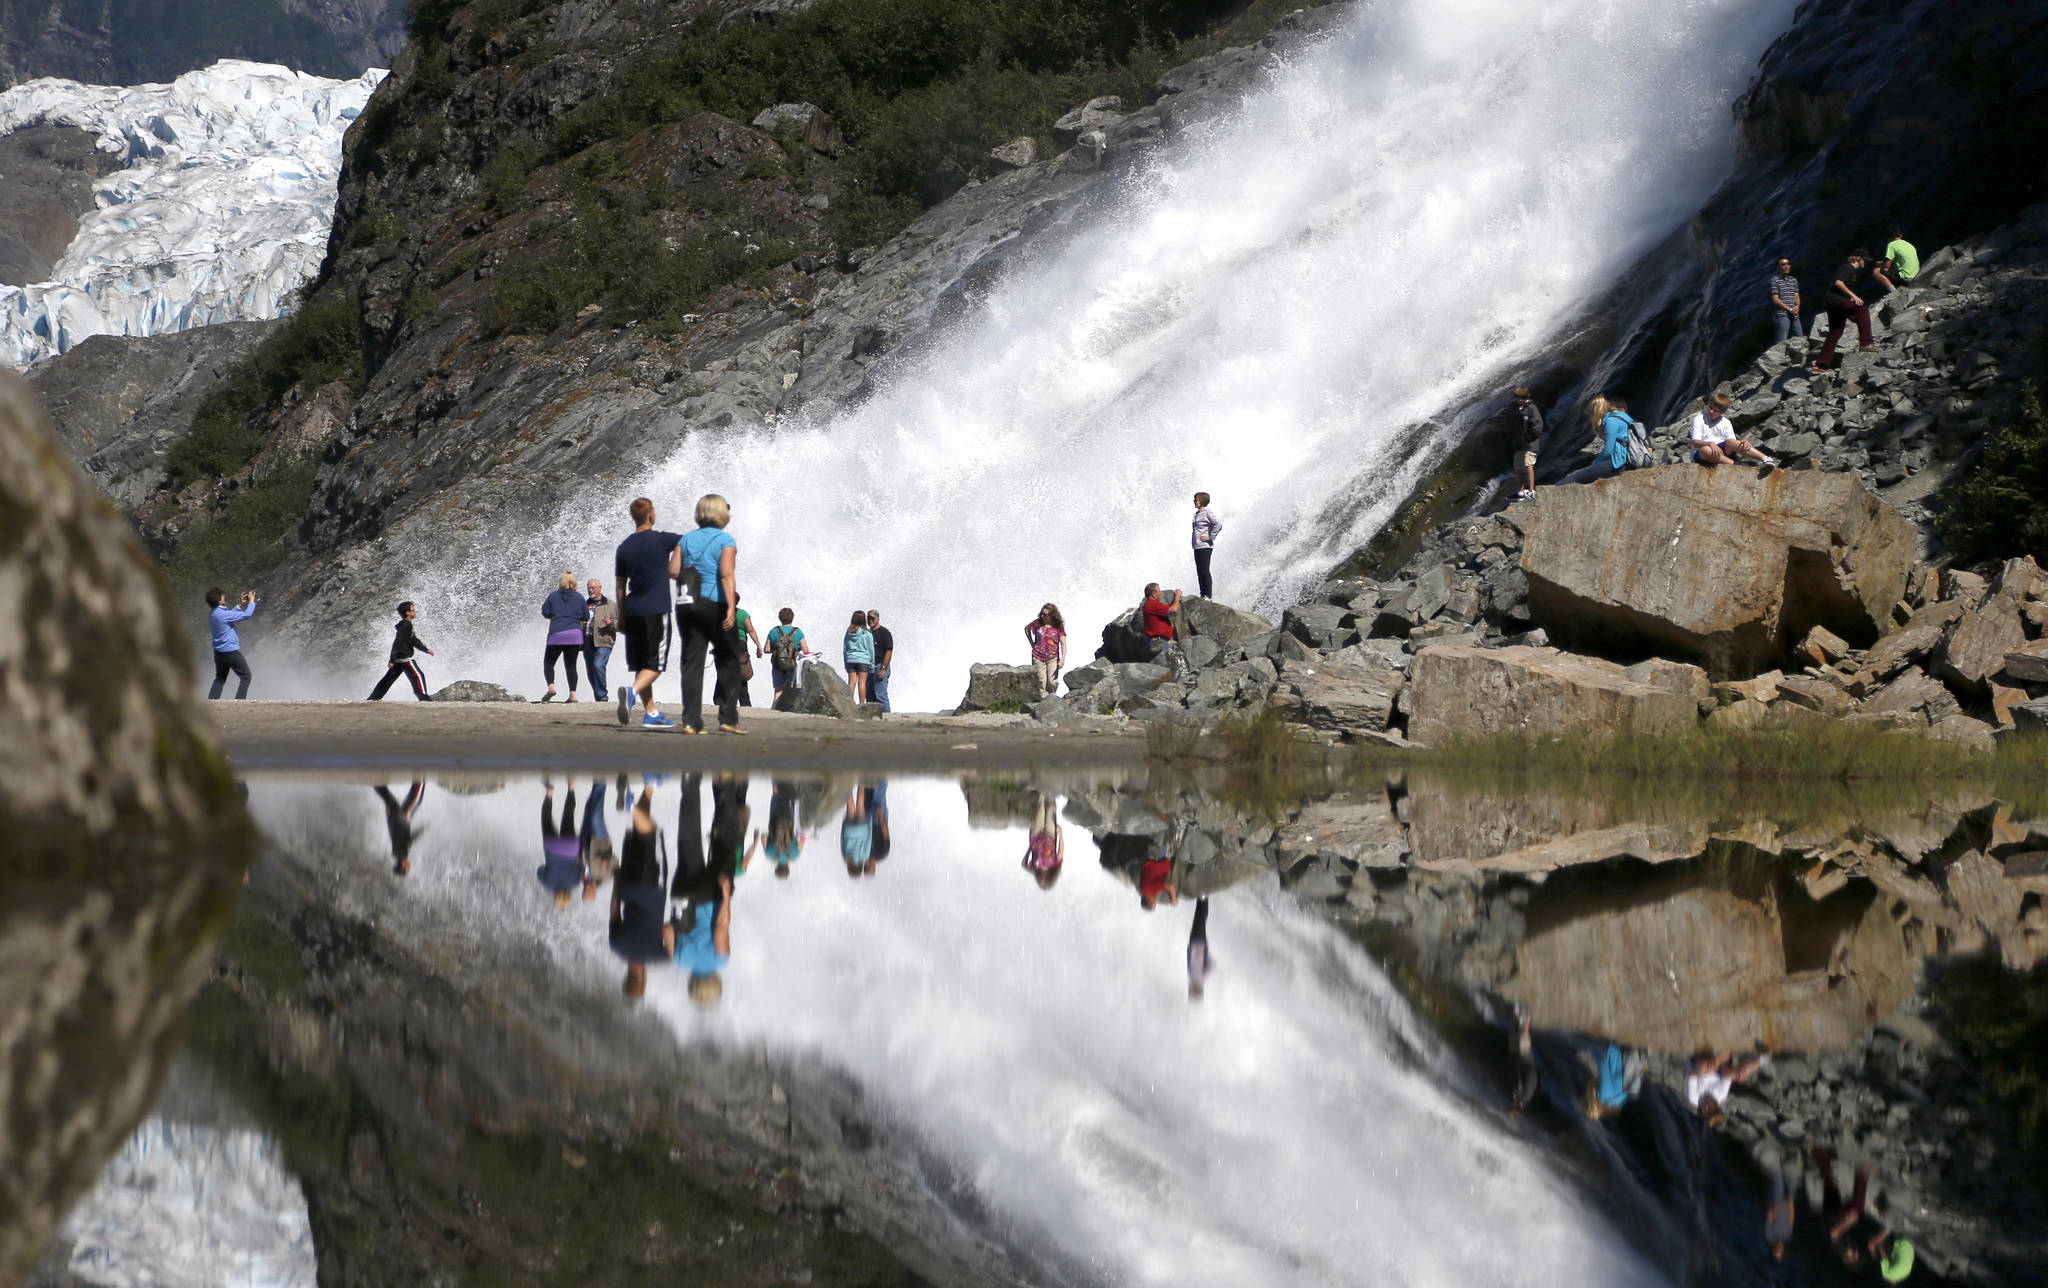 In this July 31, 2013, file photo, tourists visiting the Mendenhall Glacier in the Tongass National Forest are reflected in a pool of water as they make their way to Nugget Falls in Juneau. The federal government has announced plans to repeal or replace a decision by the Trump administration to lift restrictions on logging and road building in a southeast Alaska rainforest that provides habitat for wolves, bears and salmon. The U.S. Department of Agriculture’s plans for the Tongass National Forest were described as consistent with a January 2021 executive order from President Joe Biden that called for reviewing agency actions during the Trump administration that could be at odds with Biden’s environmental priorities. (AP Photo/Charles Rex Arbogast, File)